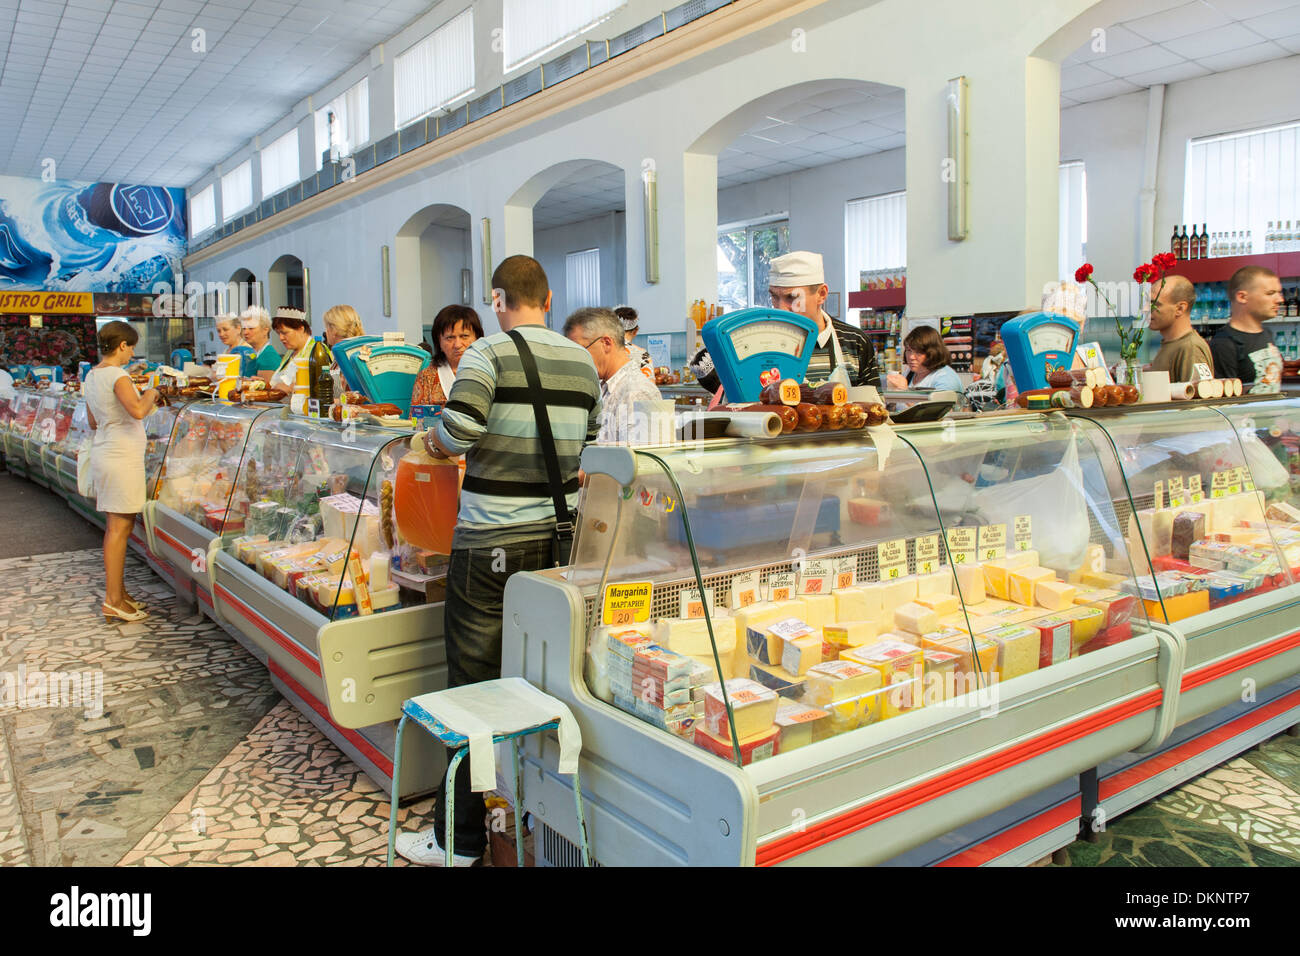 Interior of the dairy and delicatessen market in Chisinau, the capital of Moldova in Eastern Europe. Stock Photo